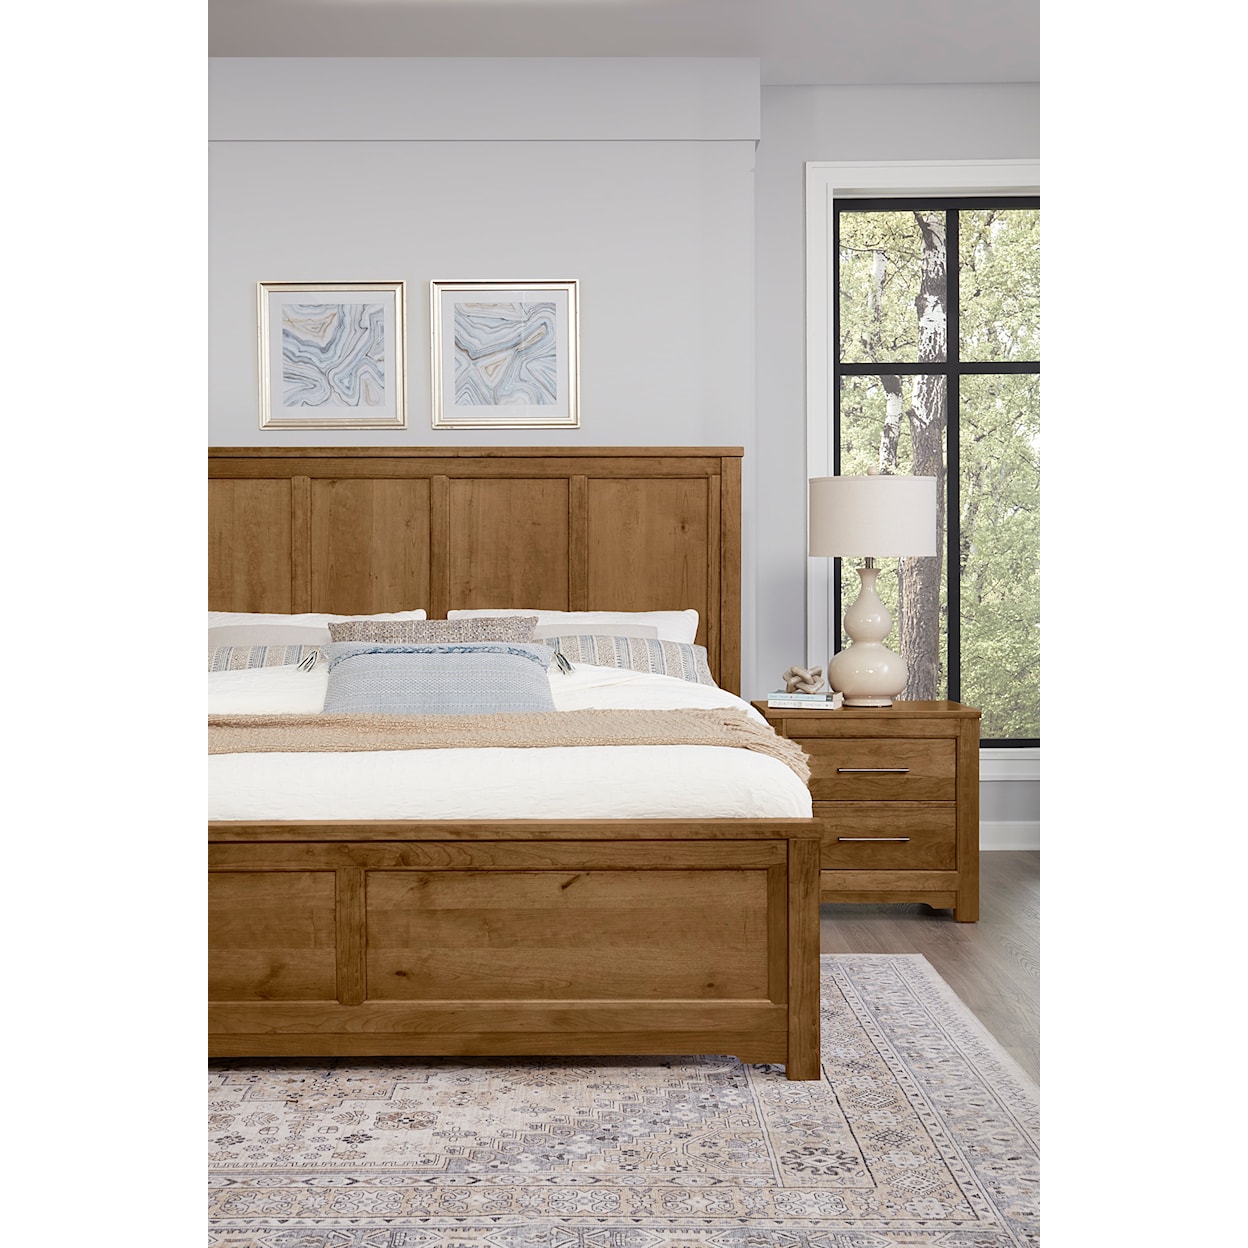 Virginia House Crafted Cherry - Medium Queen Six Panel Bed